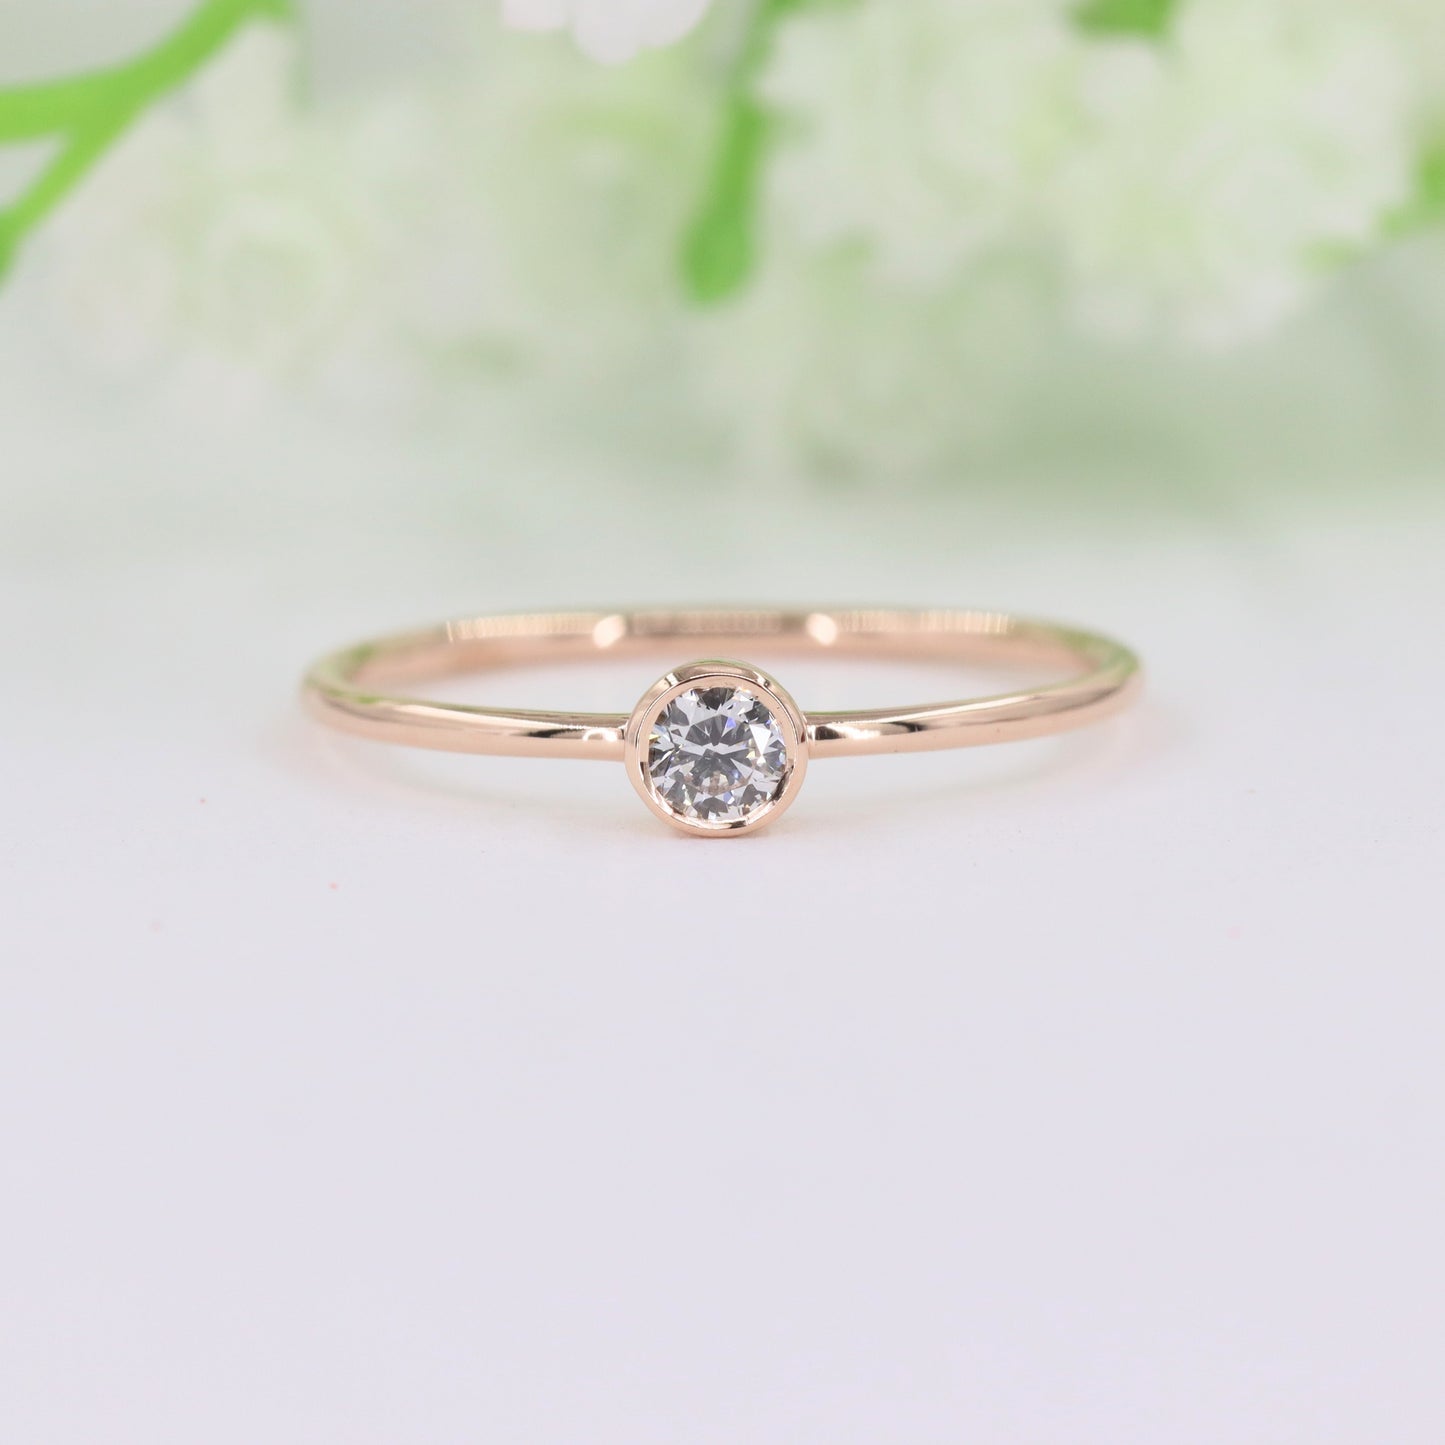 14K gold Straight Bezel .05ct Diamond Stackable Ring/ Dainty Ring/ Simple Engagement Ring/ Single Diamond Wedding Ring/Gift for her